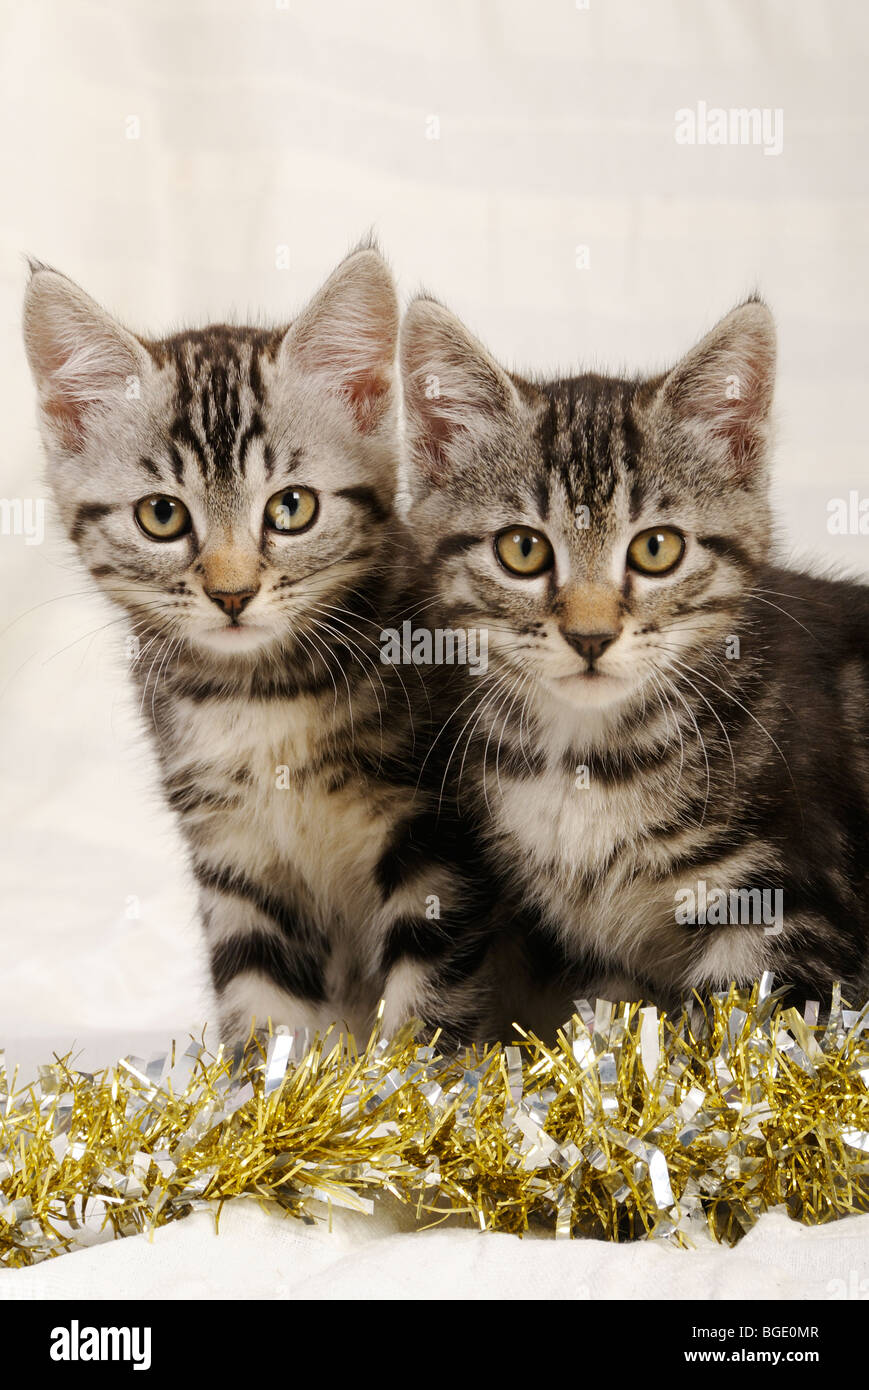 Stock photo of two kittens staring straight ahead at the camera. Stock Photo